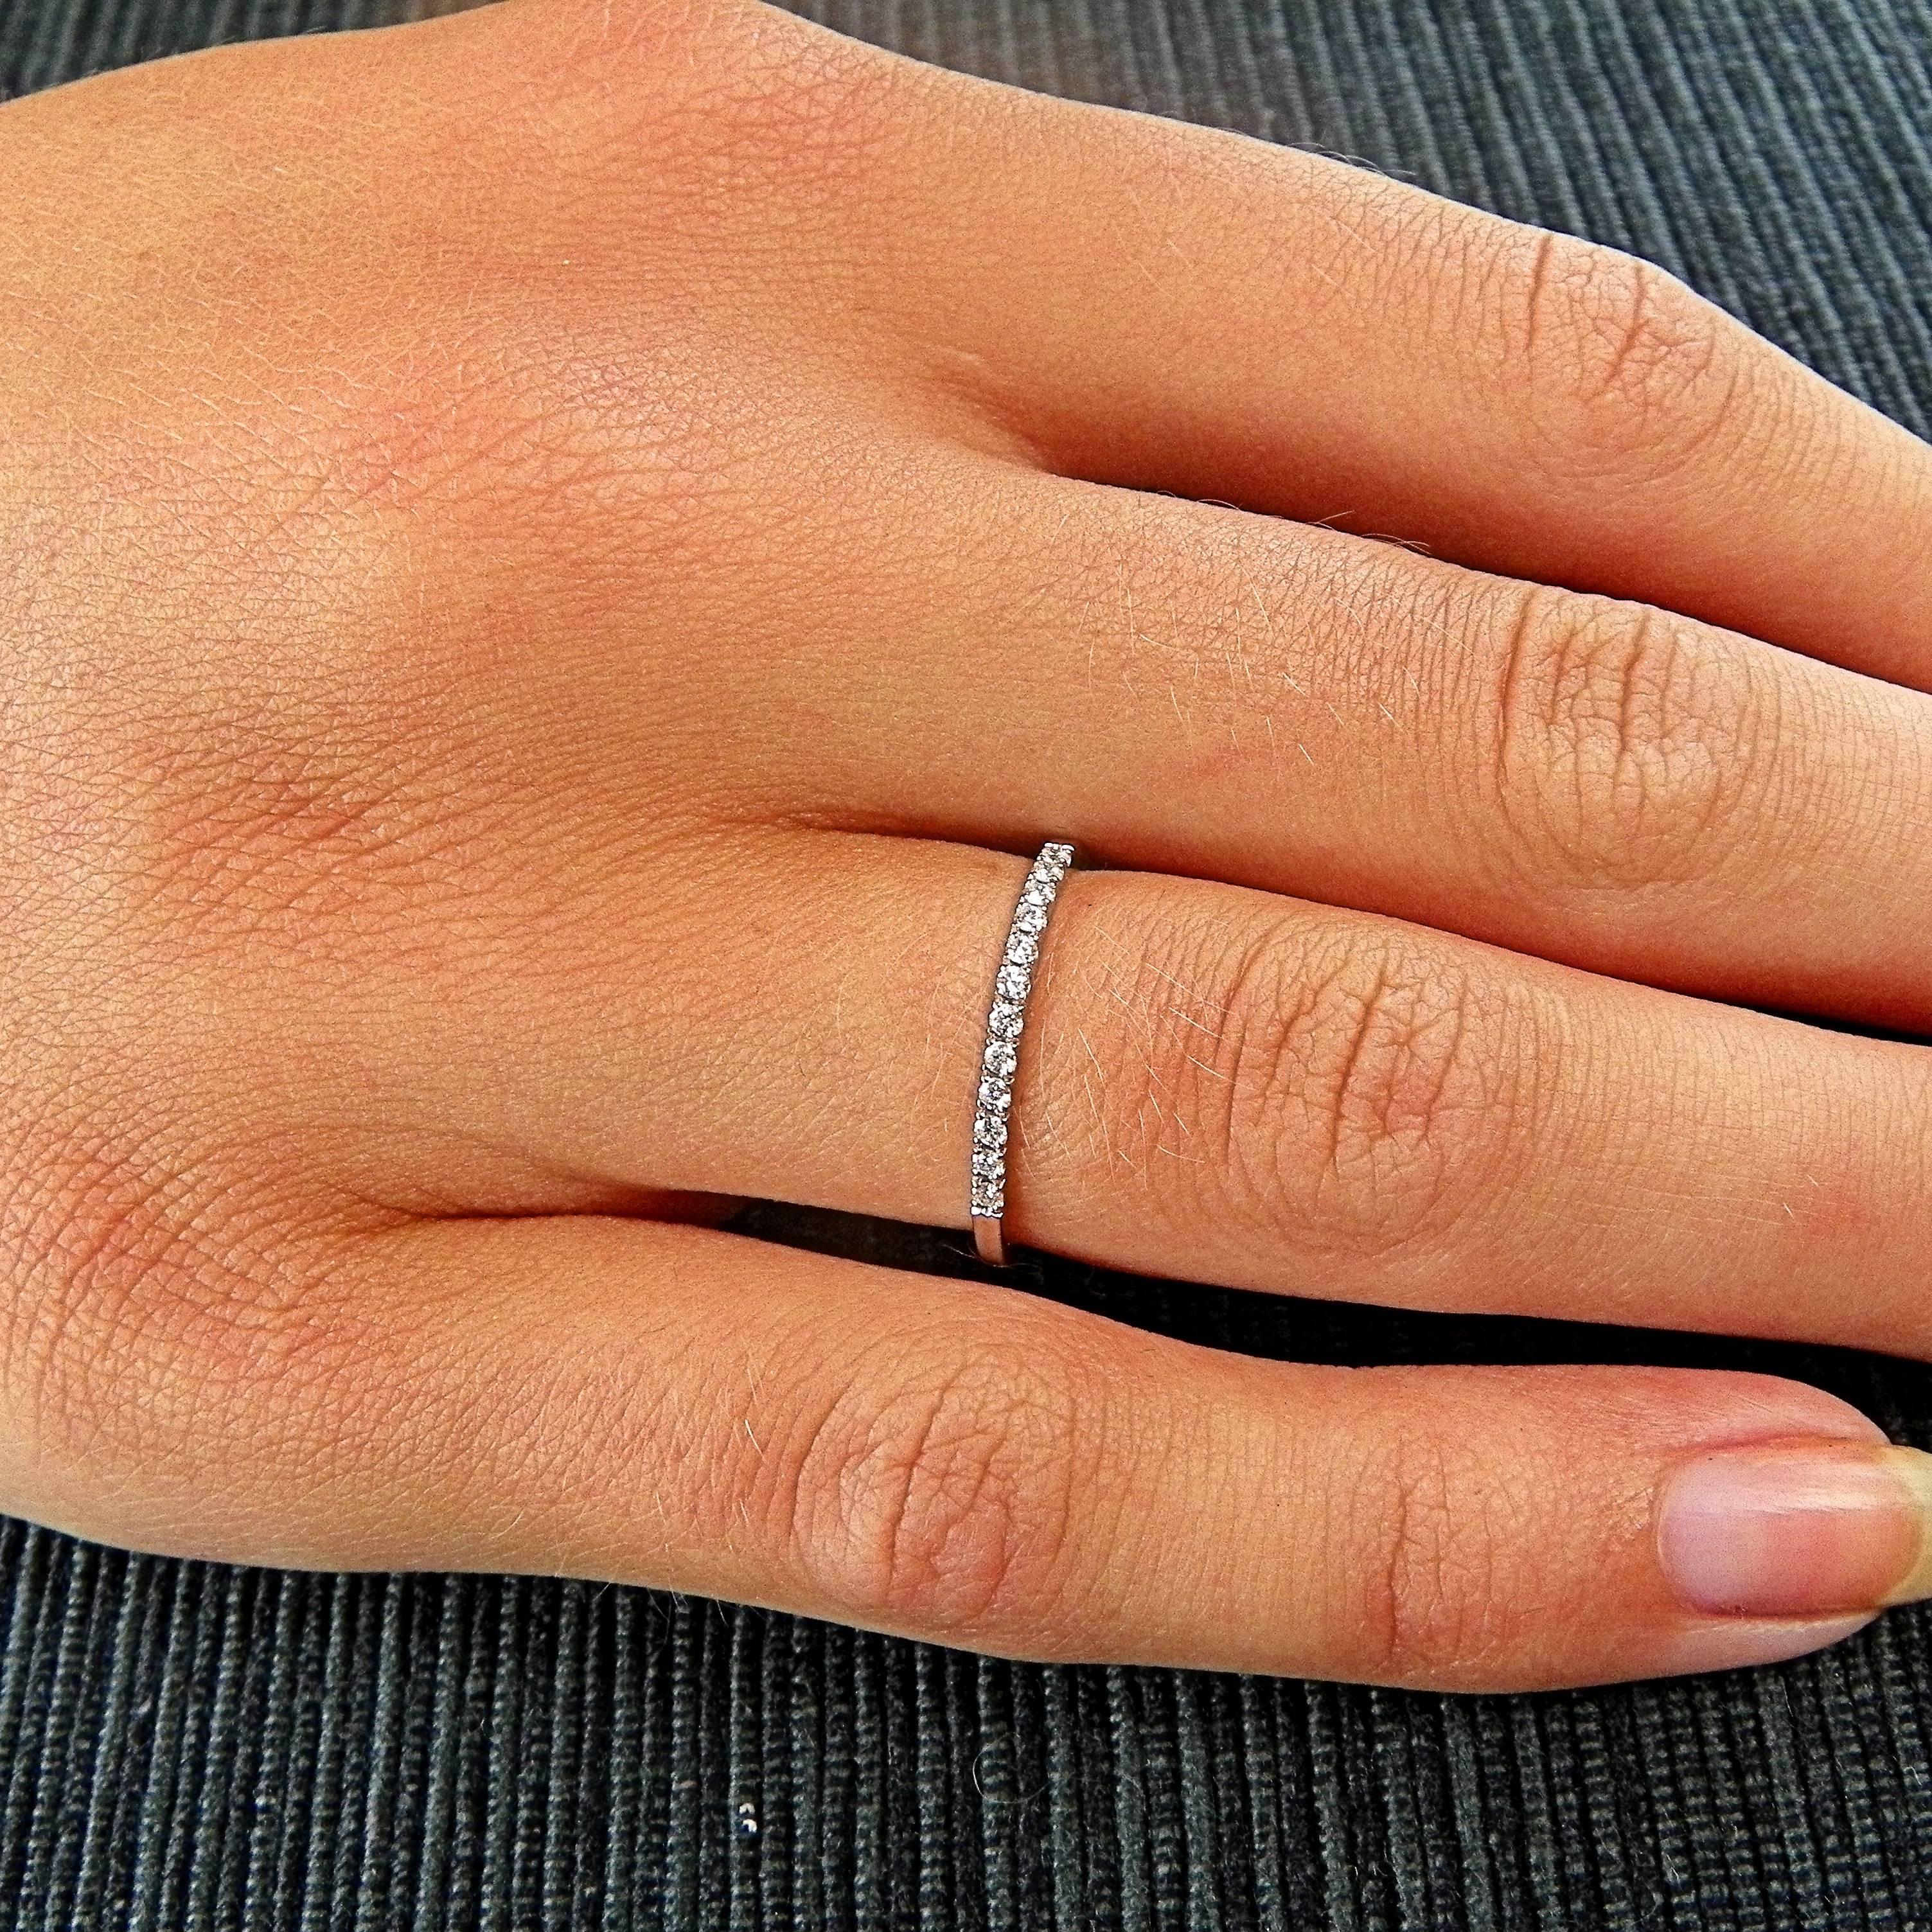 Delicate and very sparkling white Gold 14 K stacking eternity band ring. The ring is set with 12 white round brilliant cut diamonds, for every day wear, alone or with other rings. Easy to combine with other rings. 
0.12 CT, ring size US 7, French